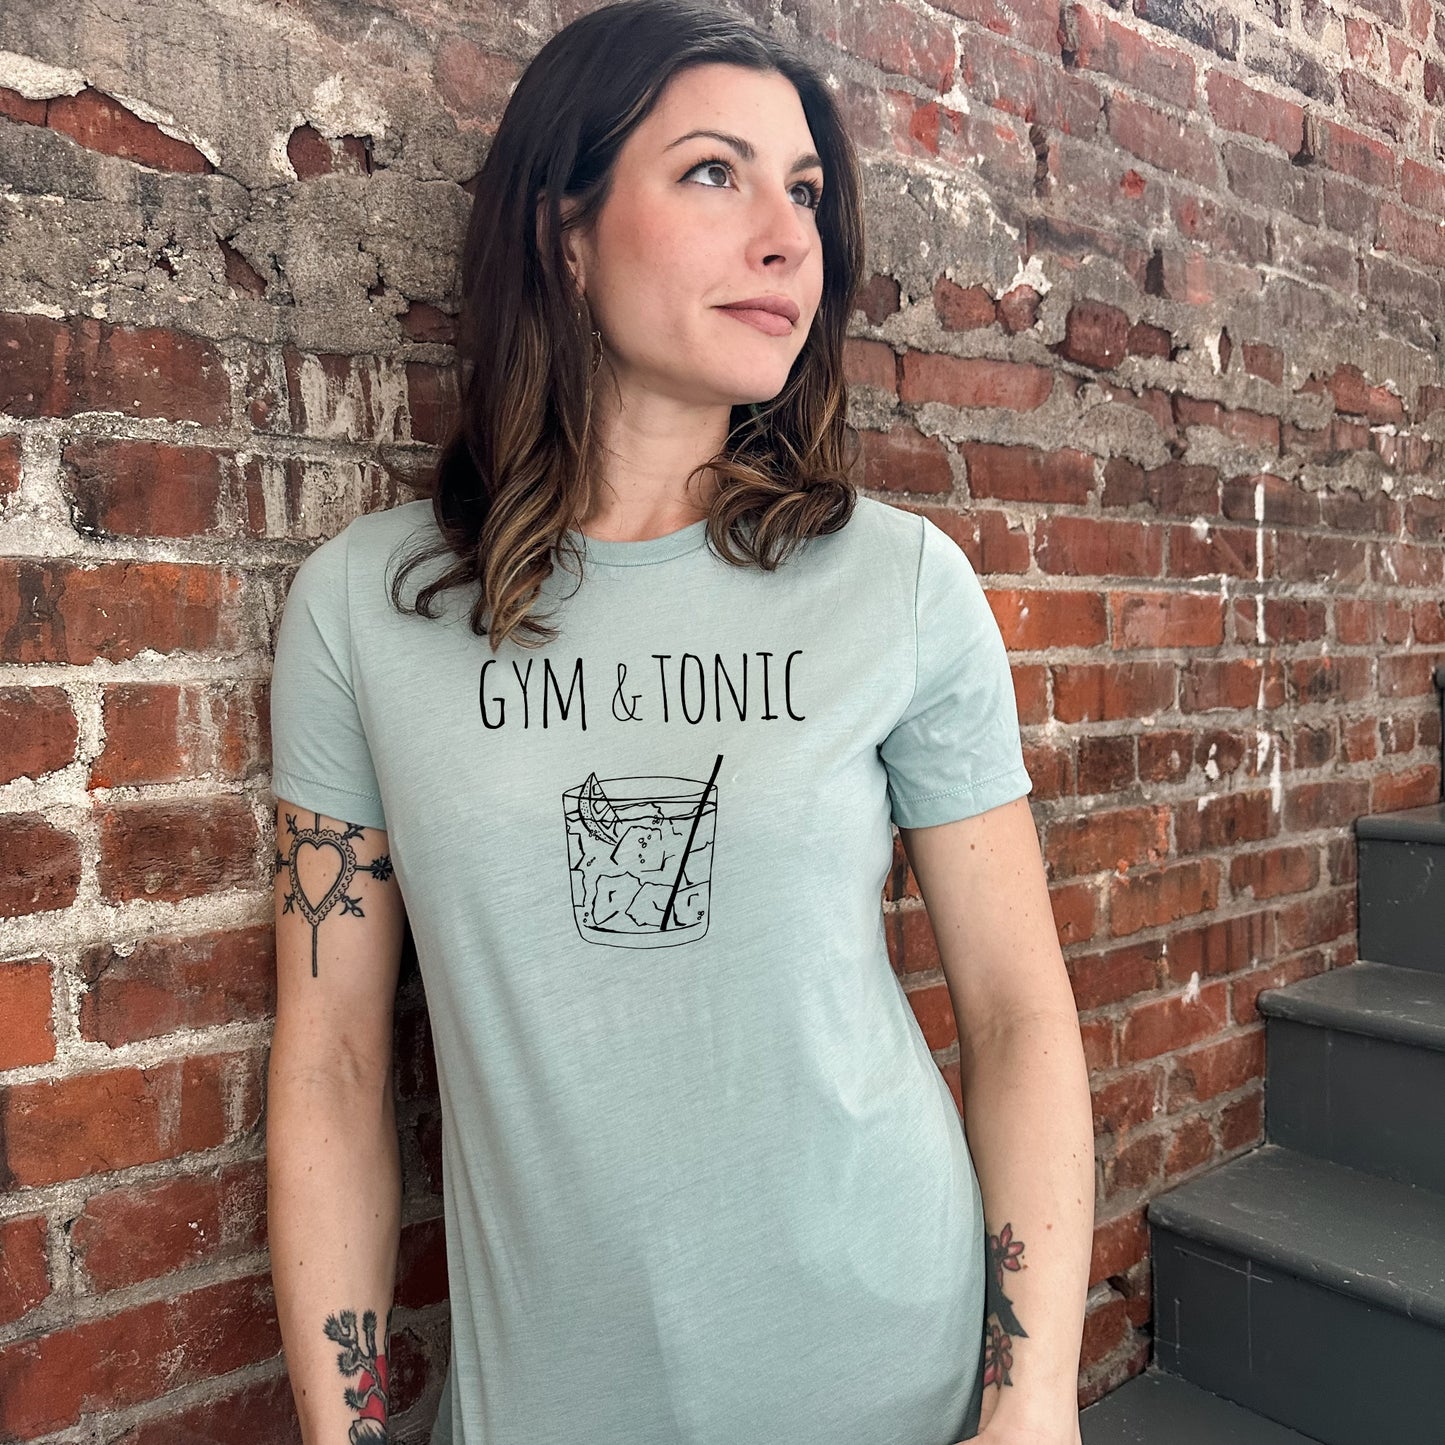 Gym & Tonic - Women's Crew Tee - Olive or Dusty Blue